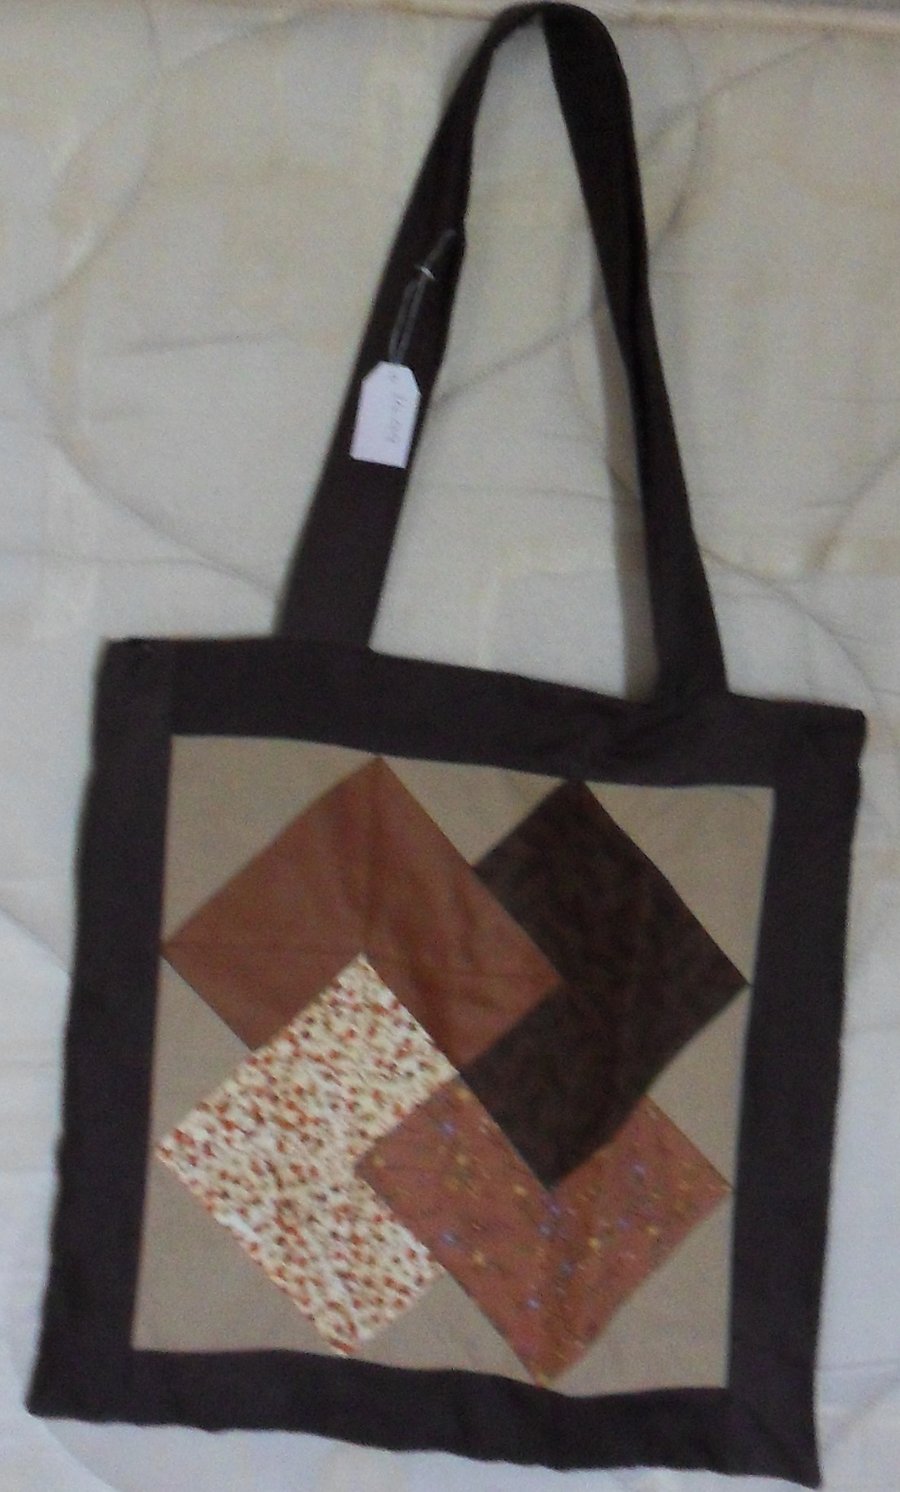 Homemade Totebag. Card trick block design. Lined.  100% cotton fabric